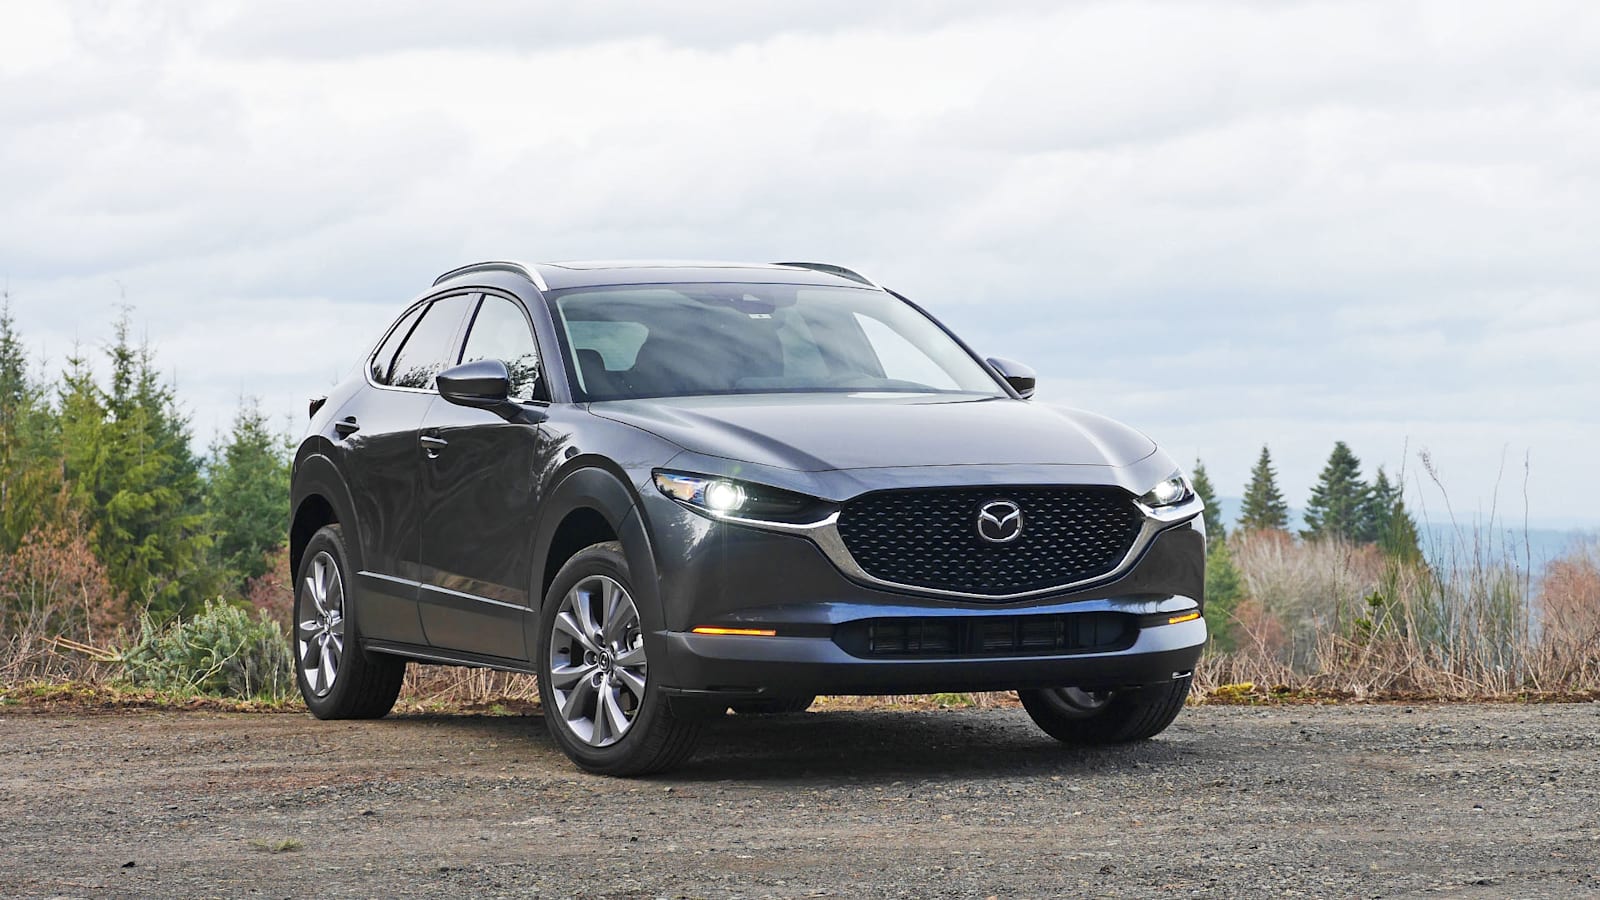 2021 Mazda CX-5 SUV: Latest Prices, Reviews, Specs, Photos and Incentives |  Autoblog